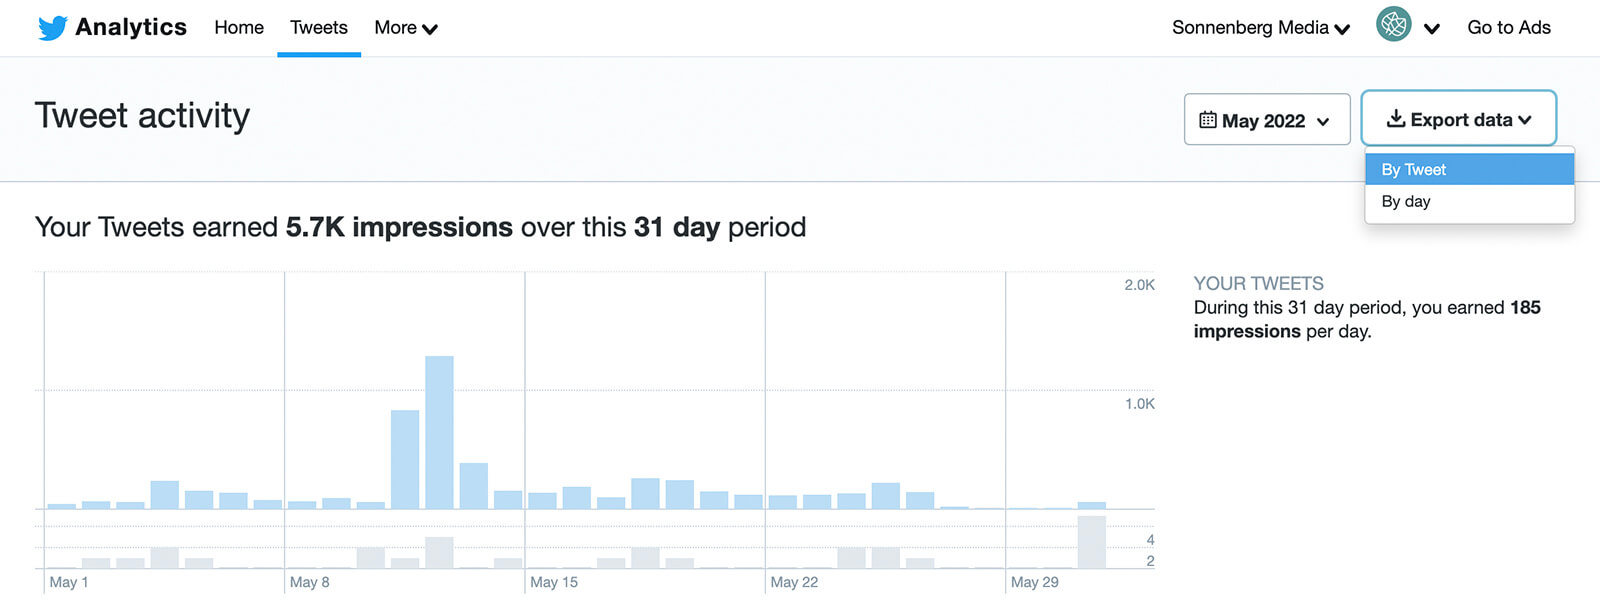 how-to-do-an-annual-social-media-audit-collect-content-and-follower-analytics-twitter-tweet-activity-example-2